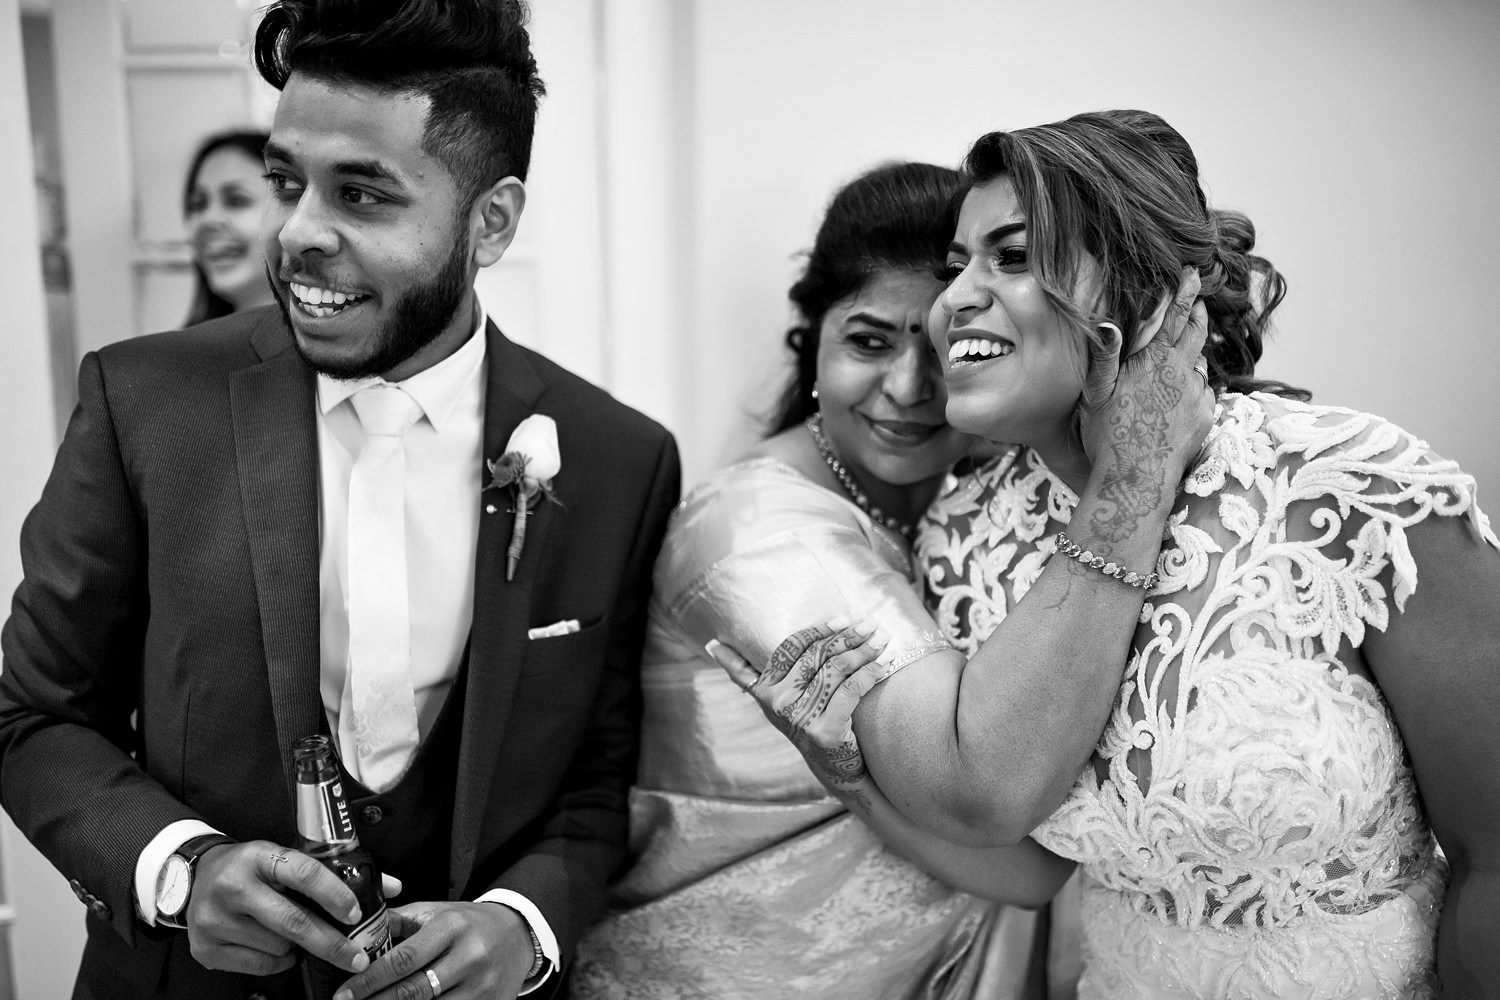 Mother of the bride embraces her daughter as they laugh